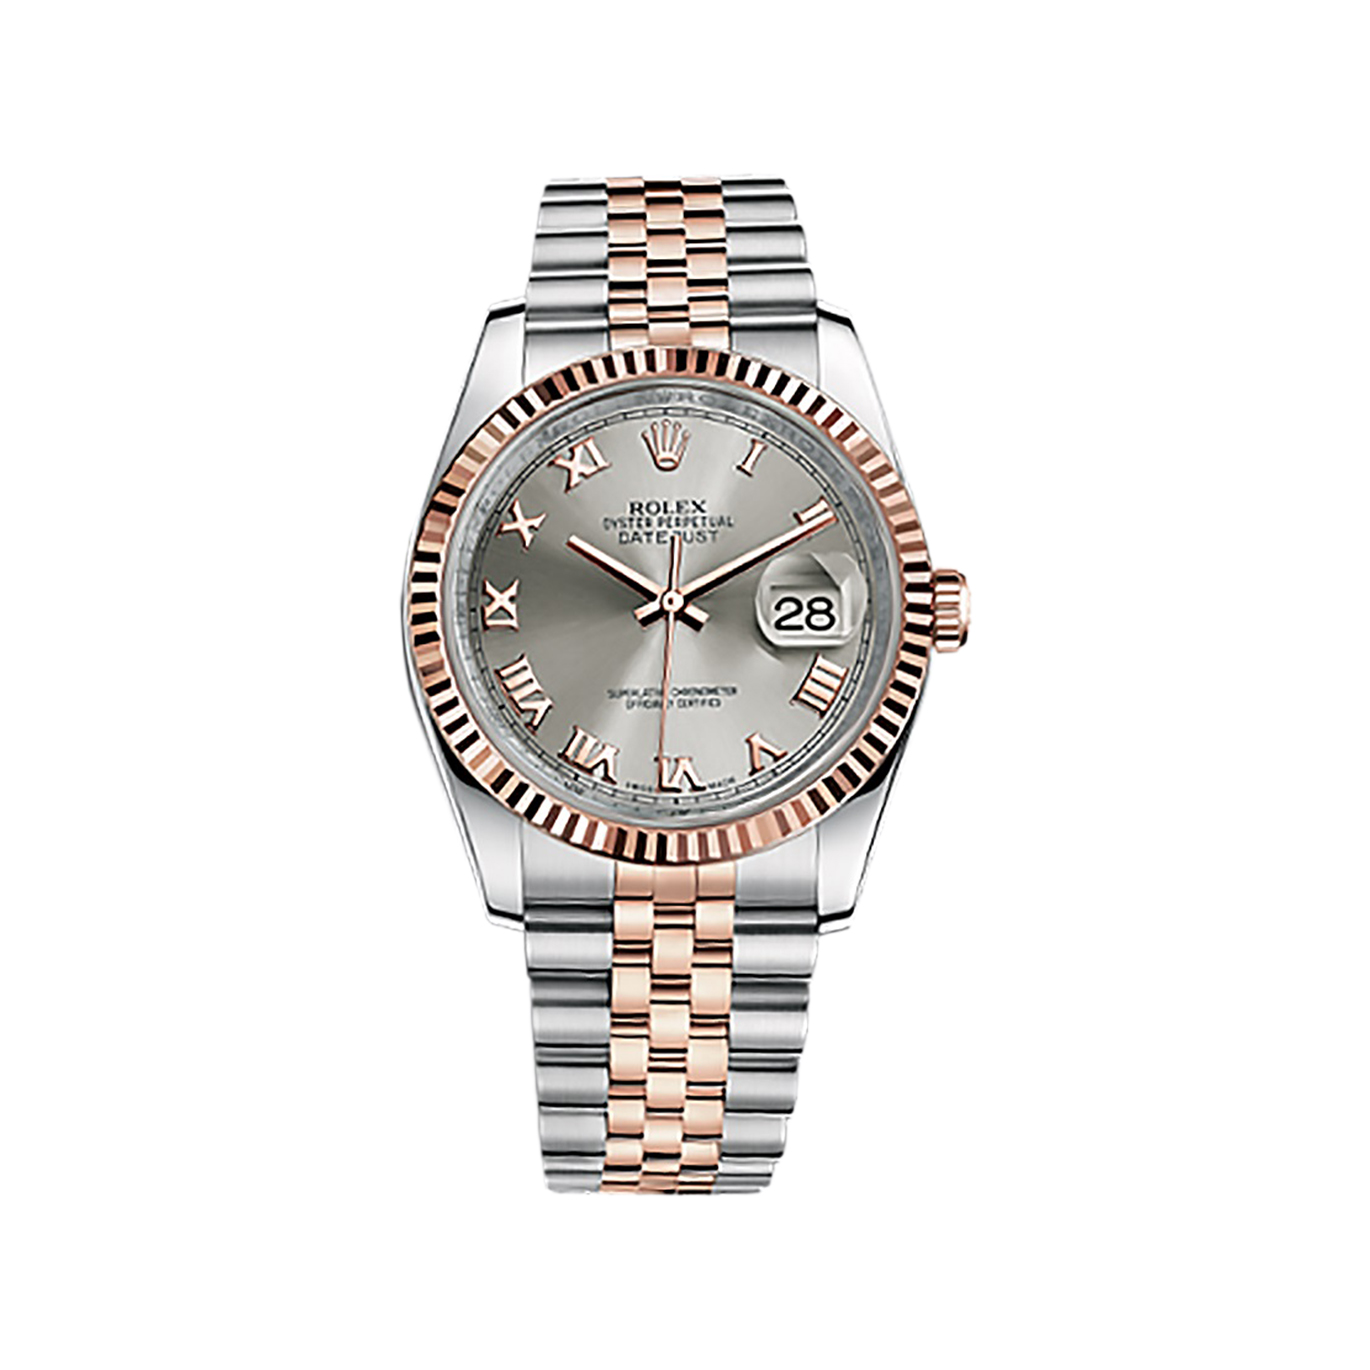 Datejust 36 116231 Rose Gold & Stainless Steel Watch (Steel) - Click Image to Close